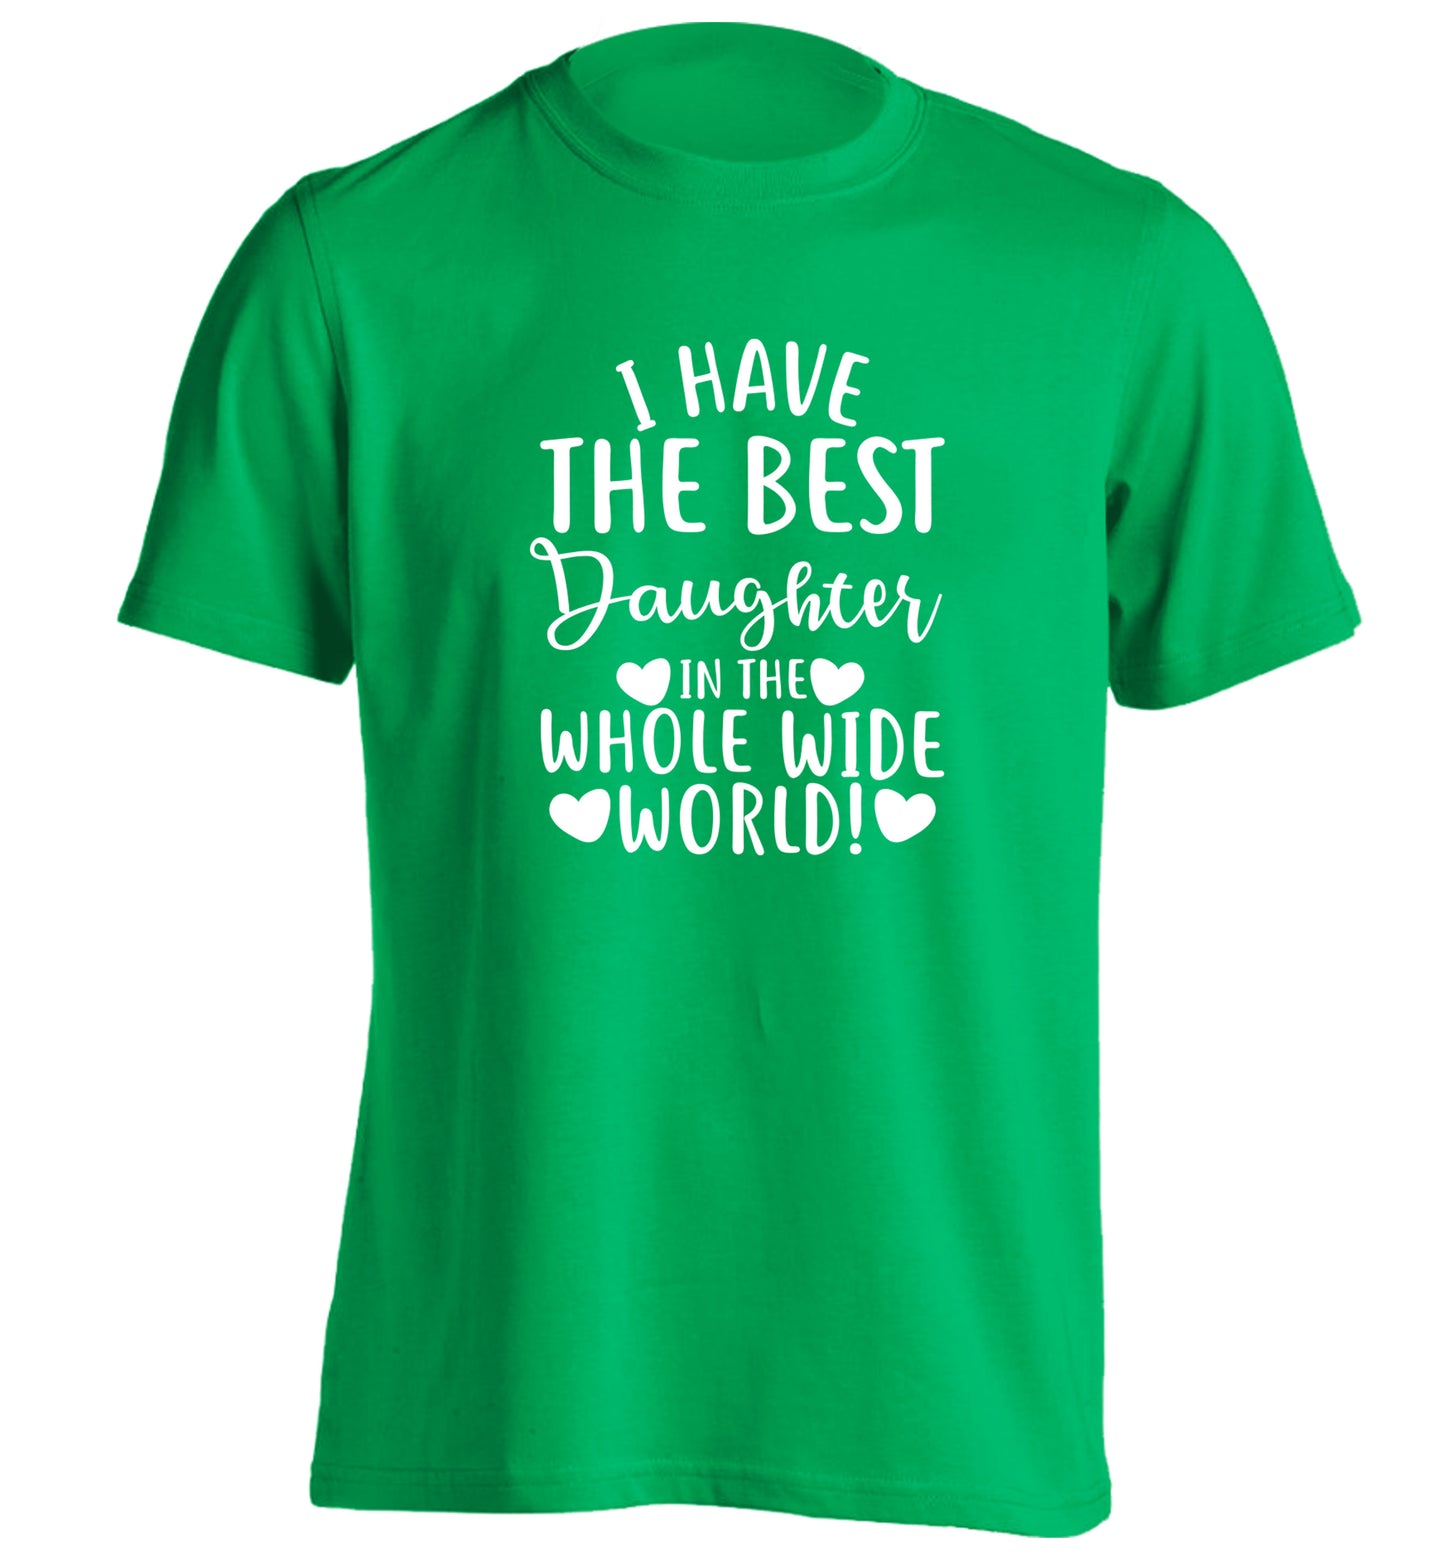 I have the best daughter in the whole wide world! adults unisex green Tshirt 2XL